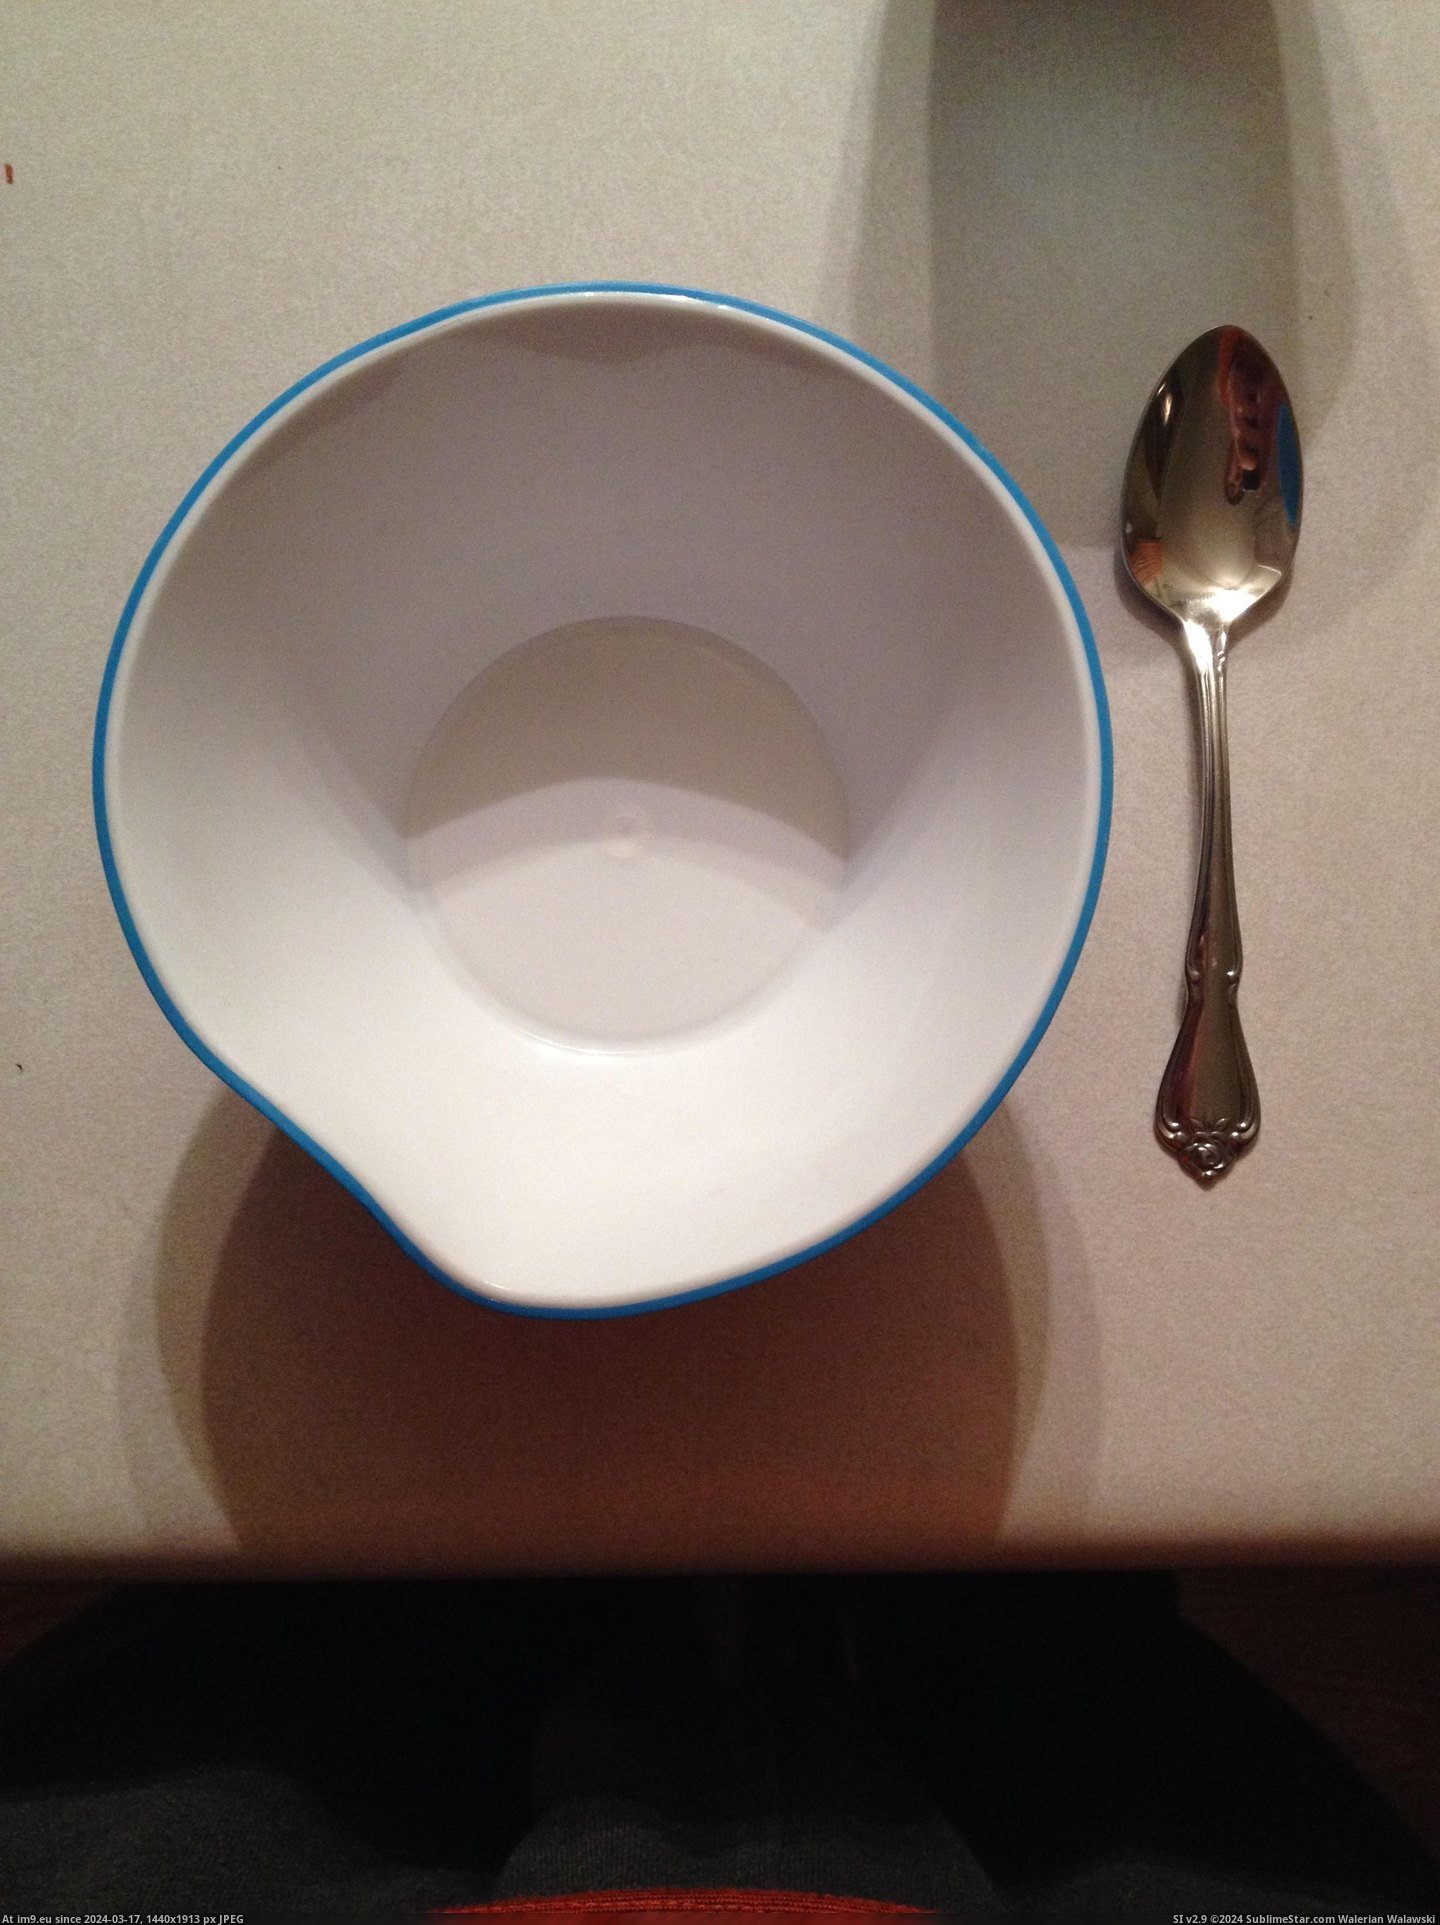 #Was #Perfect #Bowl #Spot #Circular #Sipping #Reformed #Shape #Cereal #Soo #Dishwasher [Mildlyinteresting] Soo my cereal bowl, normally circular in shape, was reformed by my dishwasher to make a perfect sipping spot Pic. (Image of album My r/MILDLYINTERESTING favs))